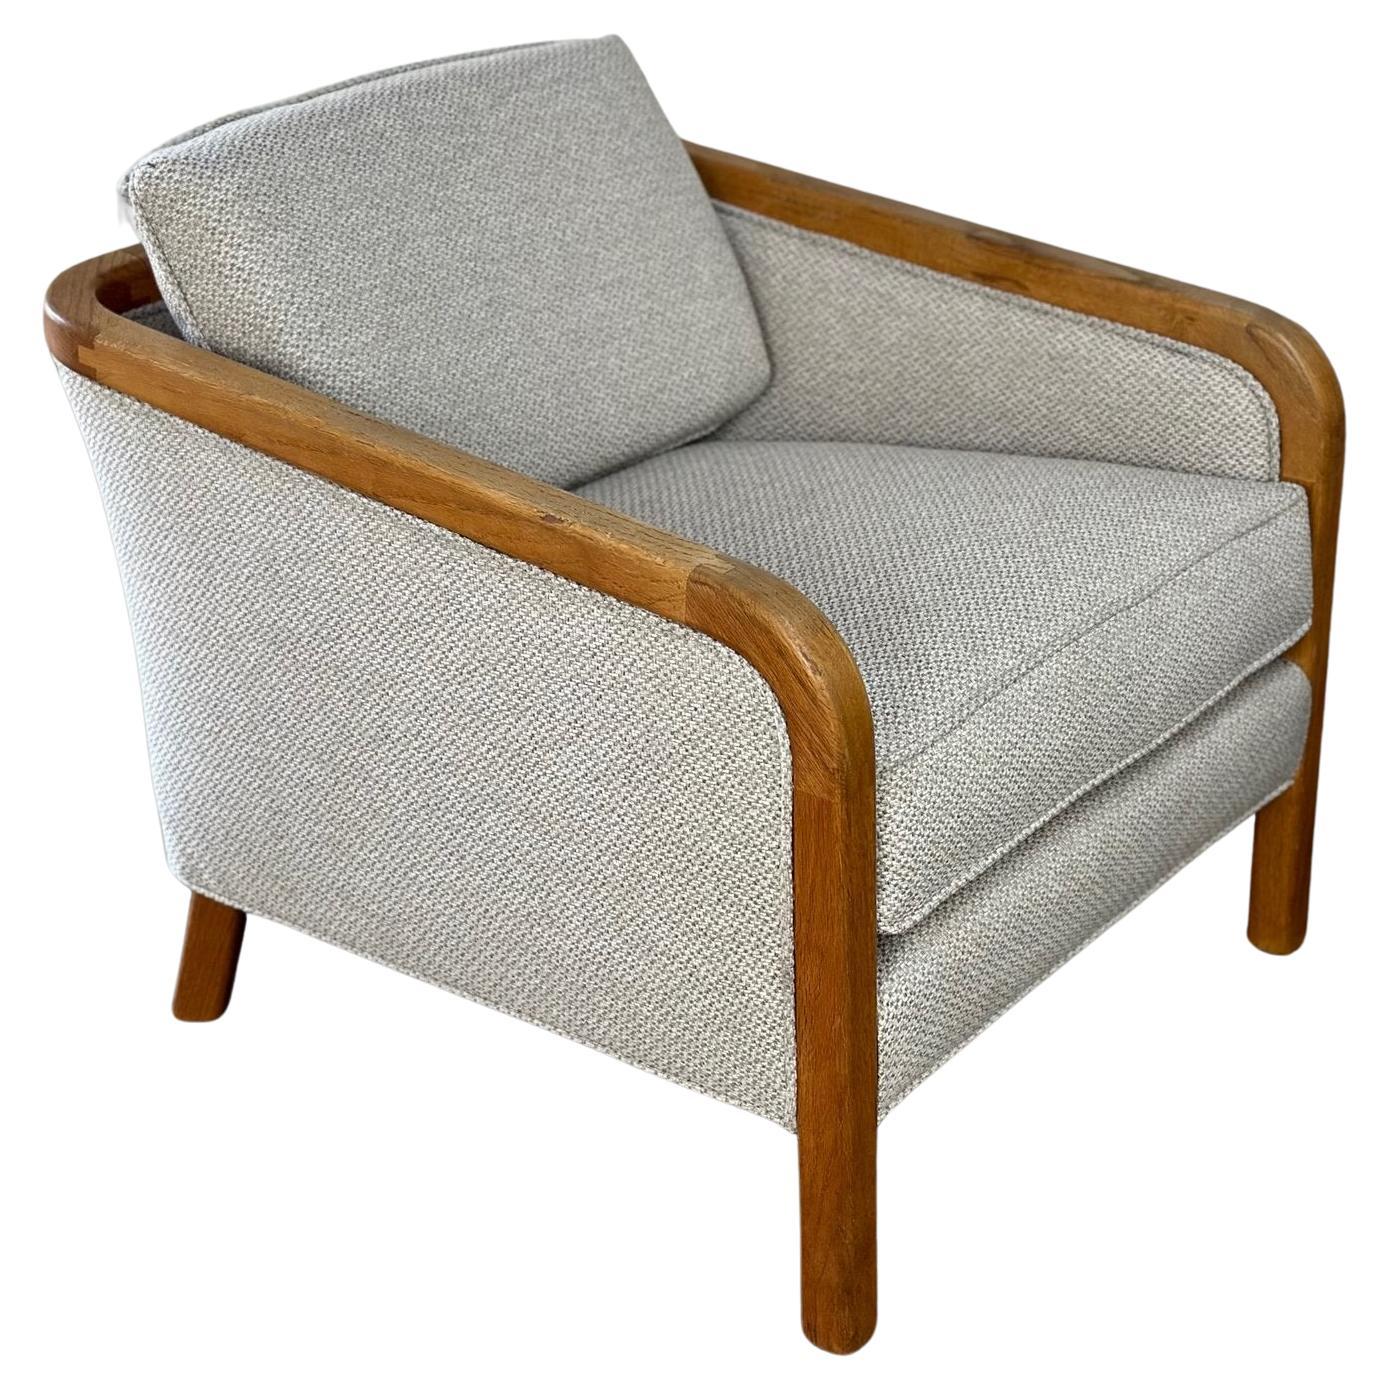 Mid century lounge chair with exposed joinery- Single Chair